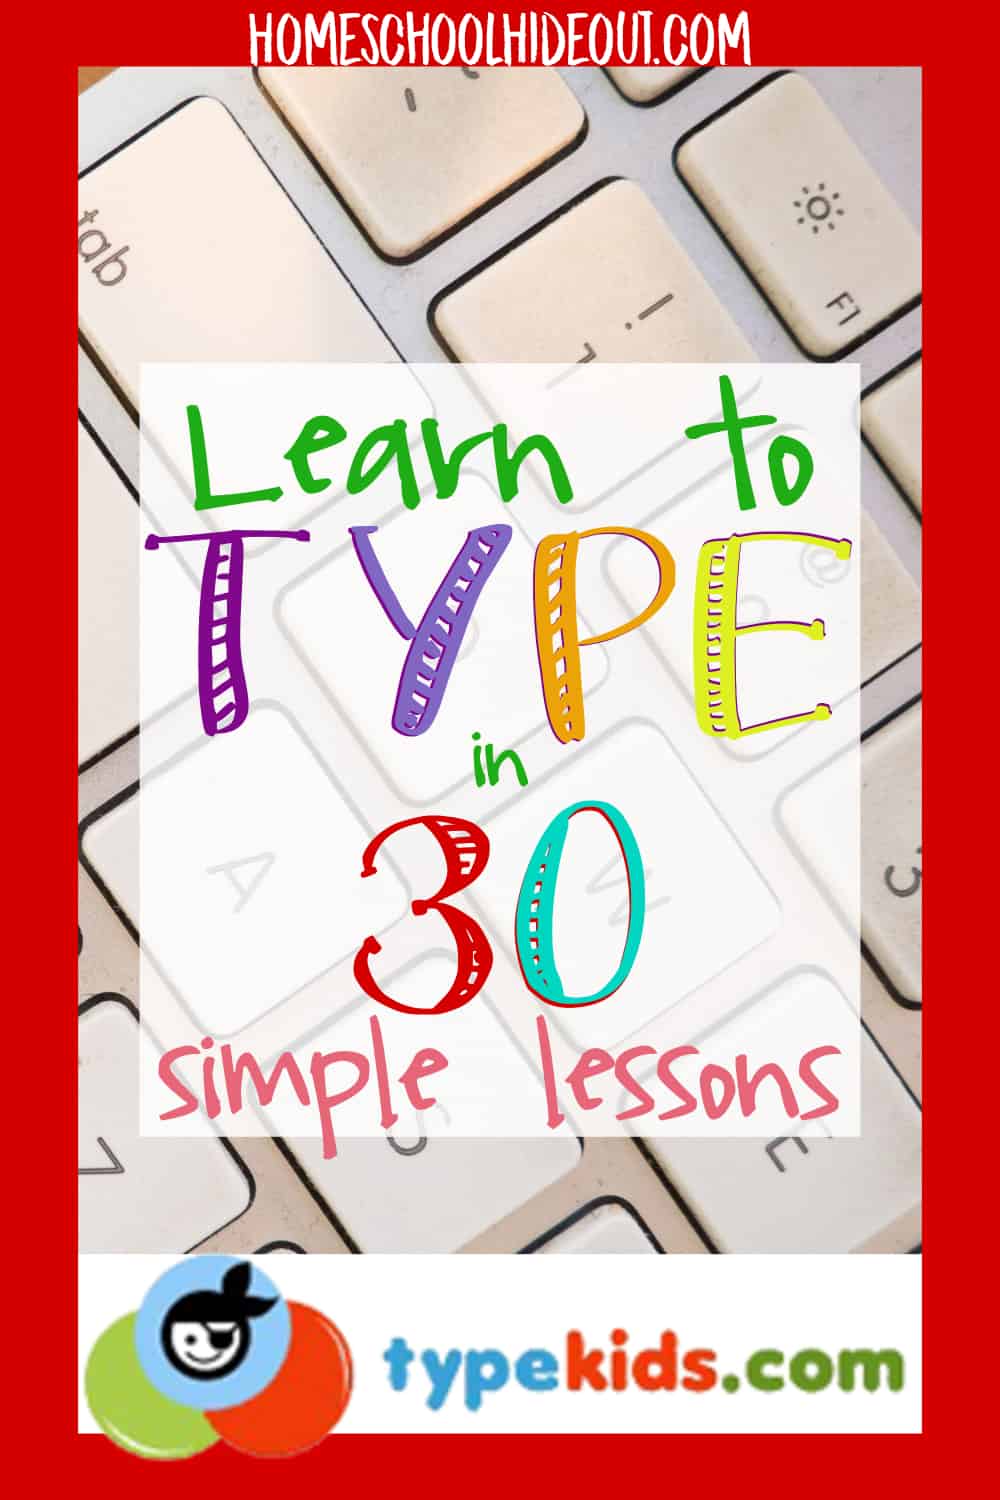 Learn to type quickly and proficiently with TypeKids! #typing #homeschool #homeschooling #learntotype #onlinelearning